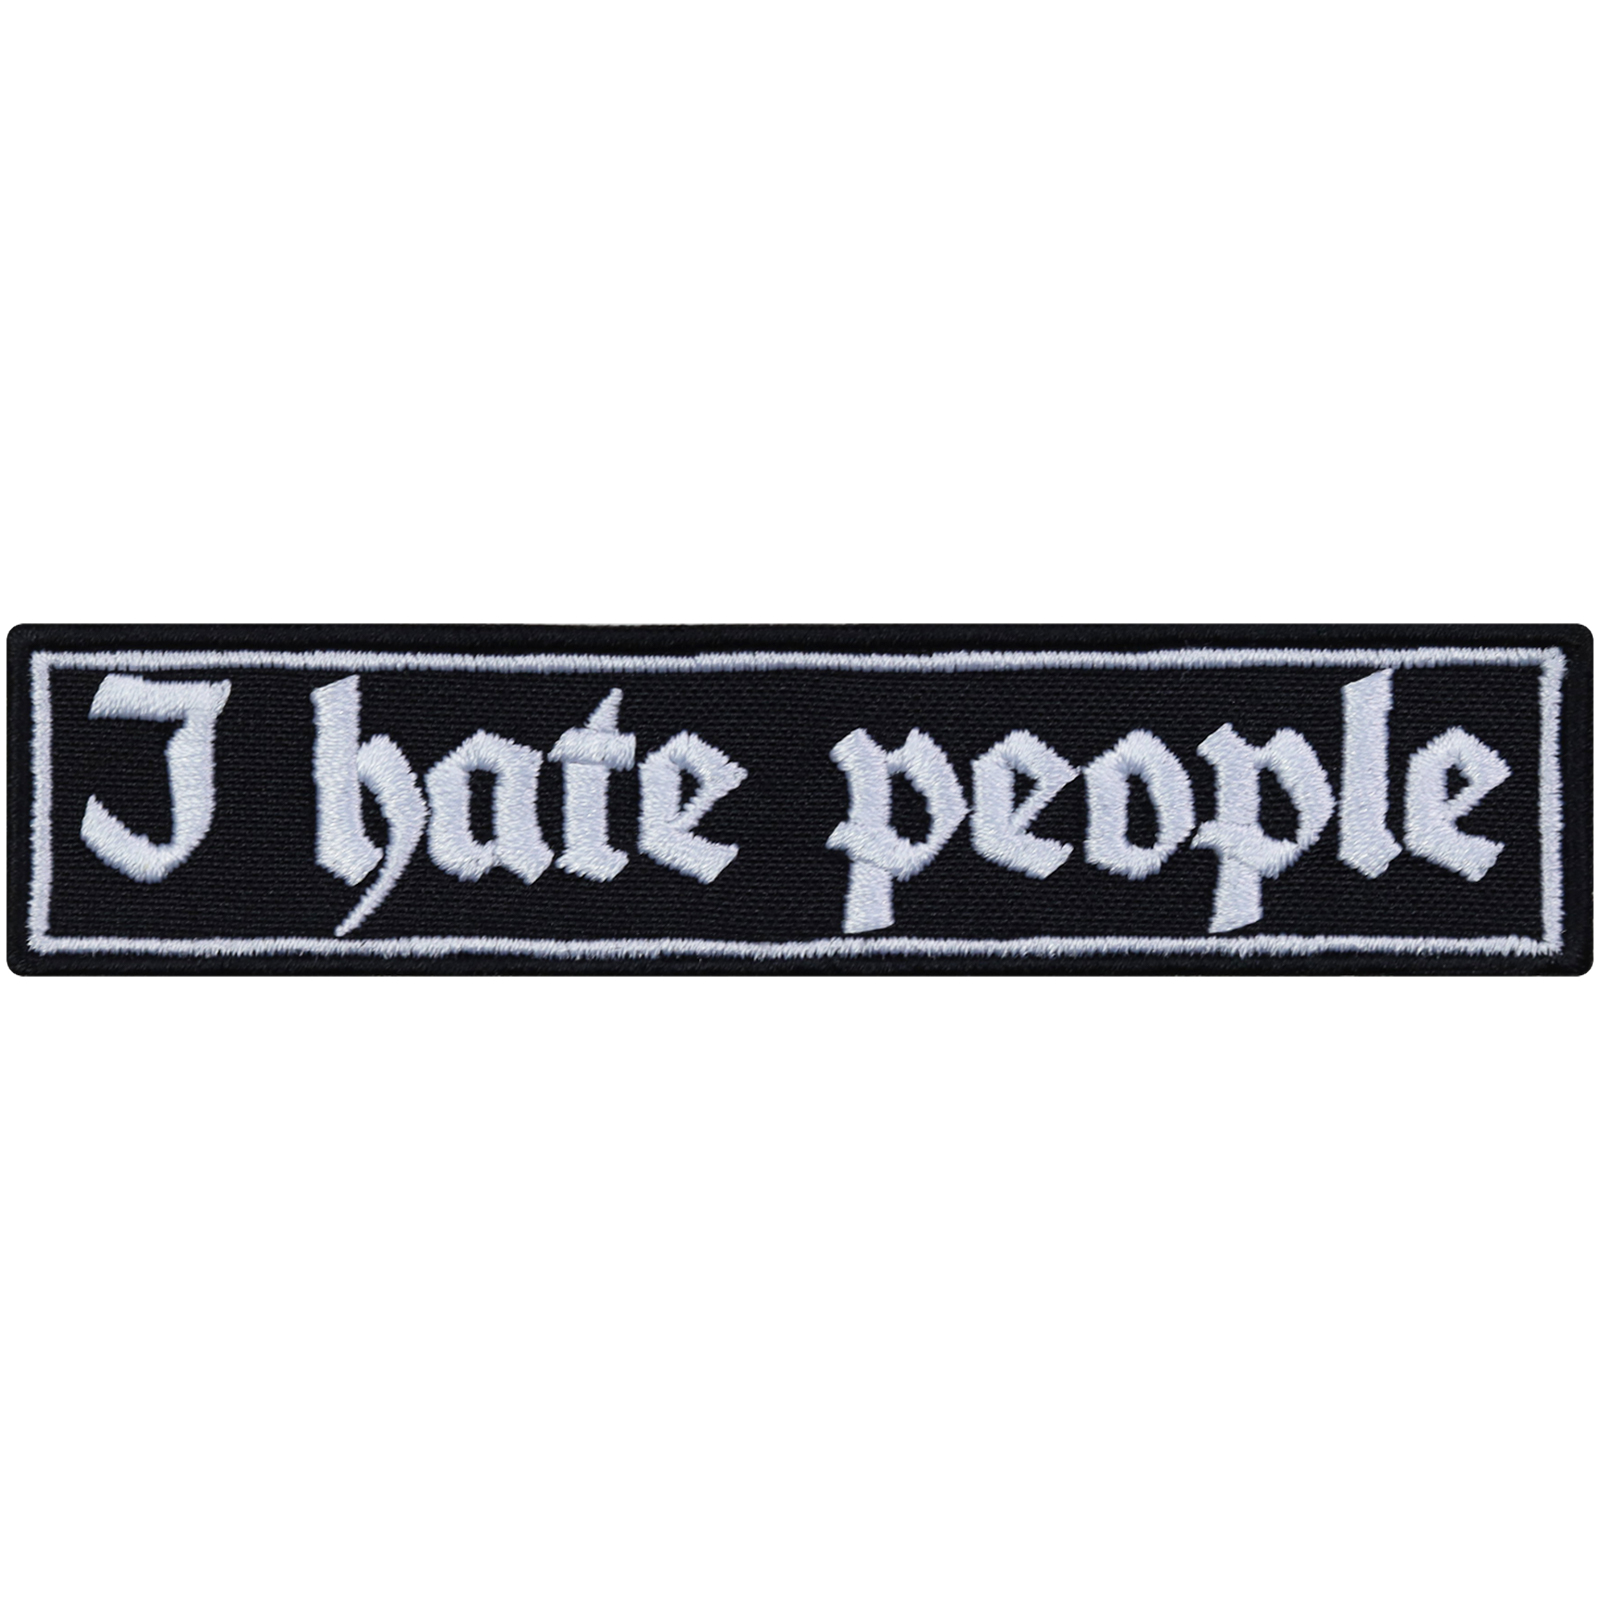 I hate people - Patch